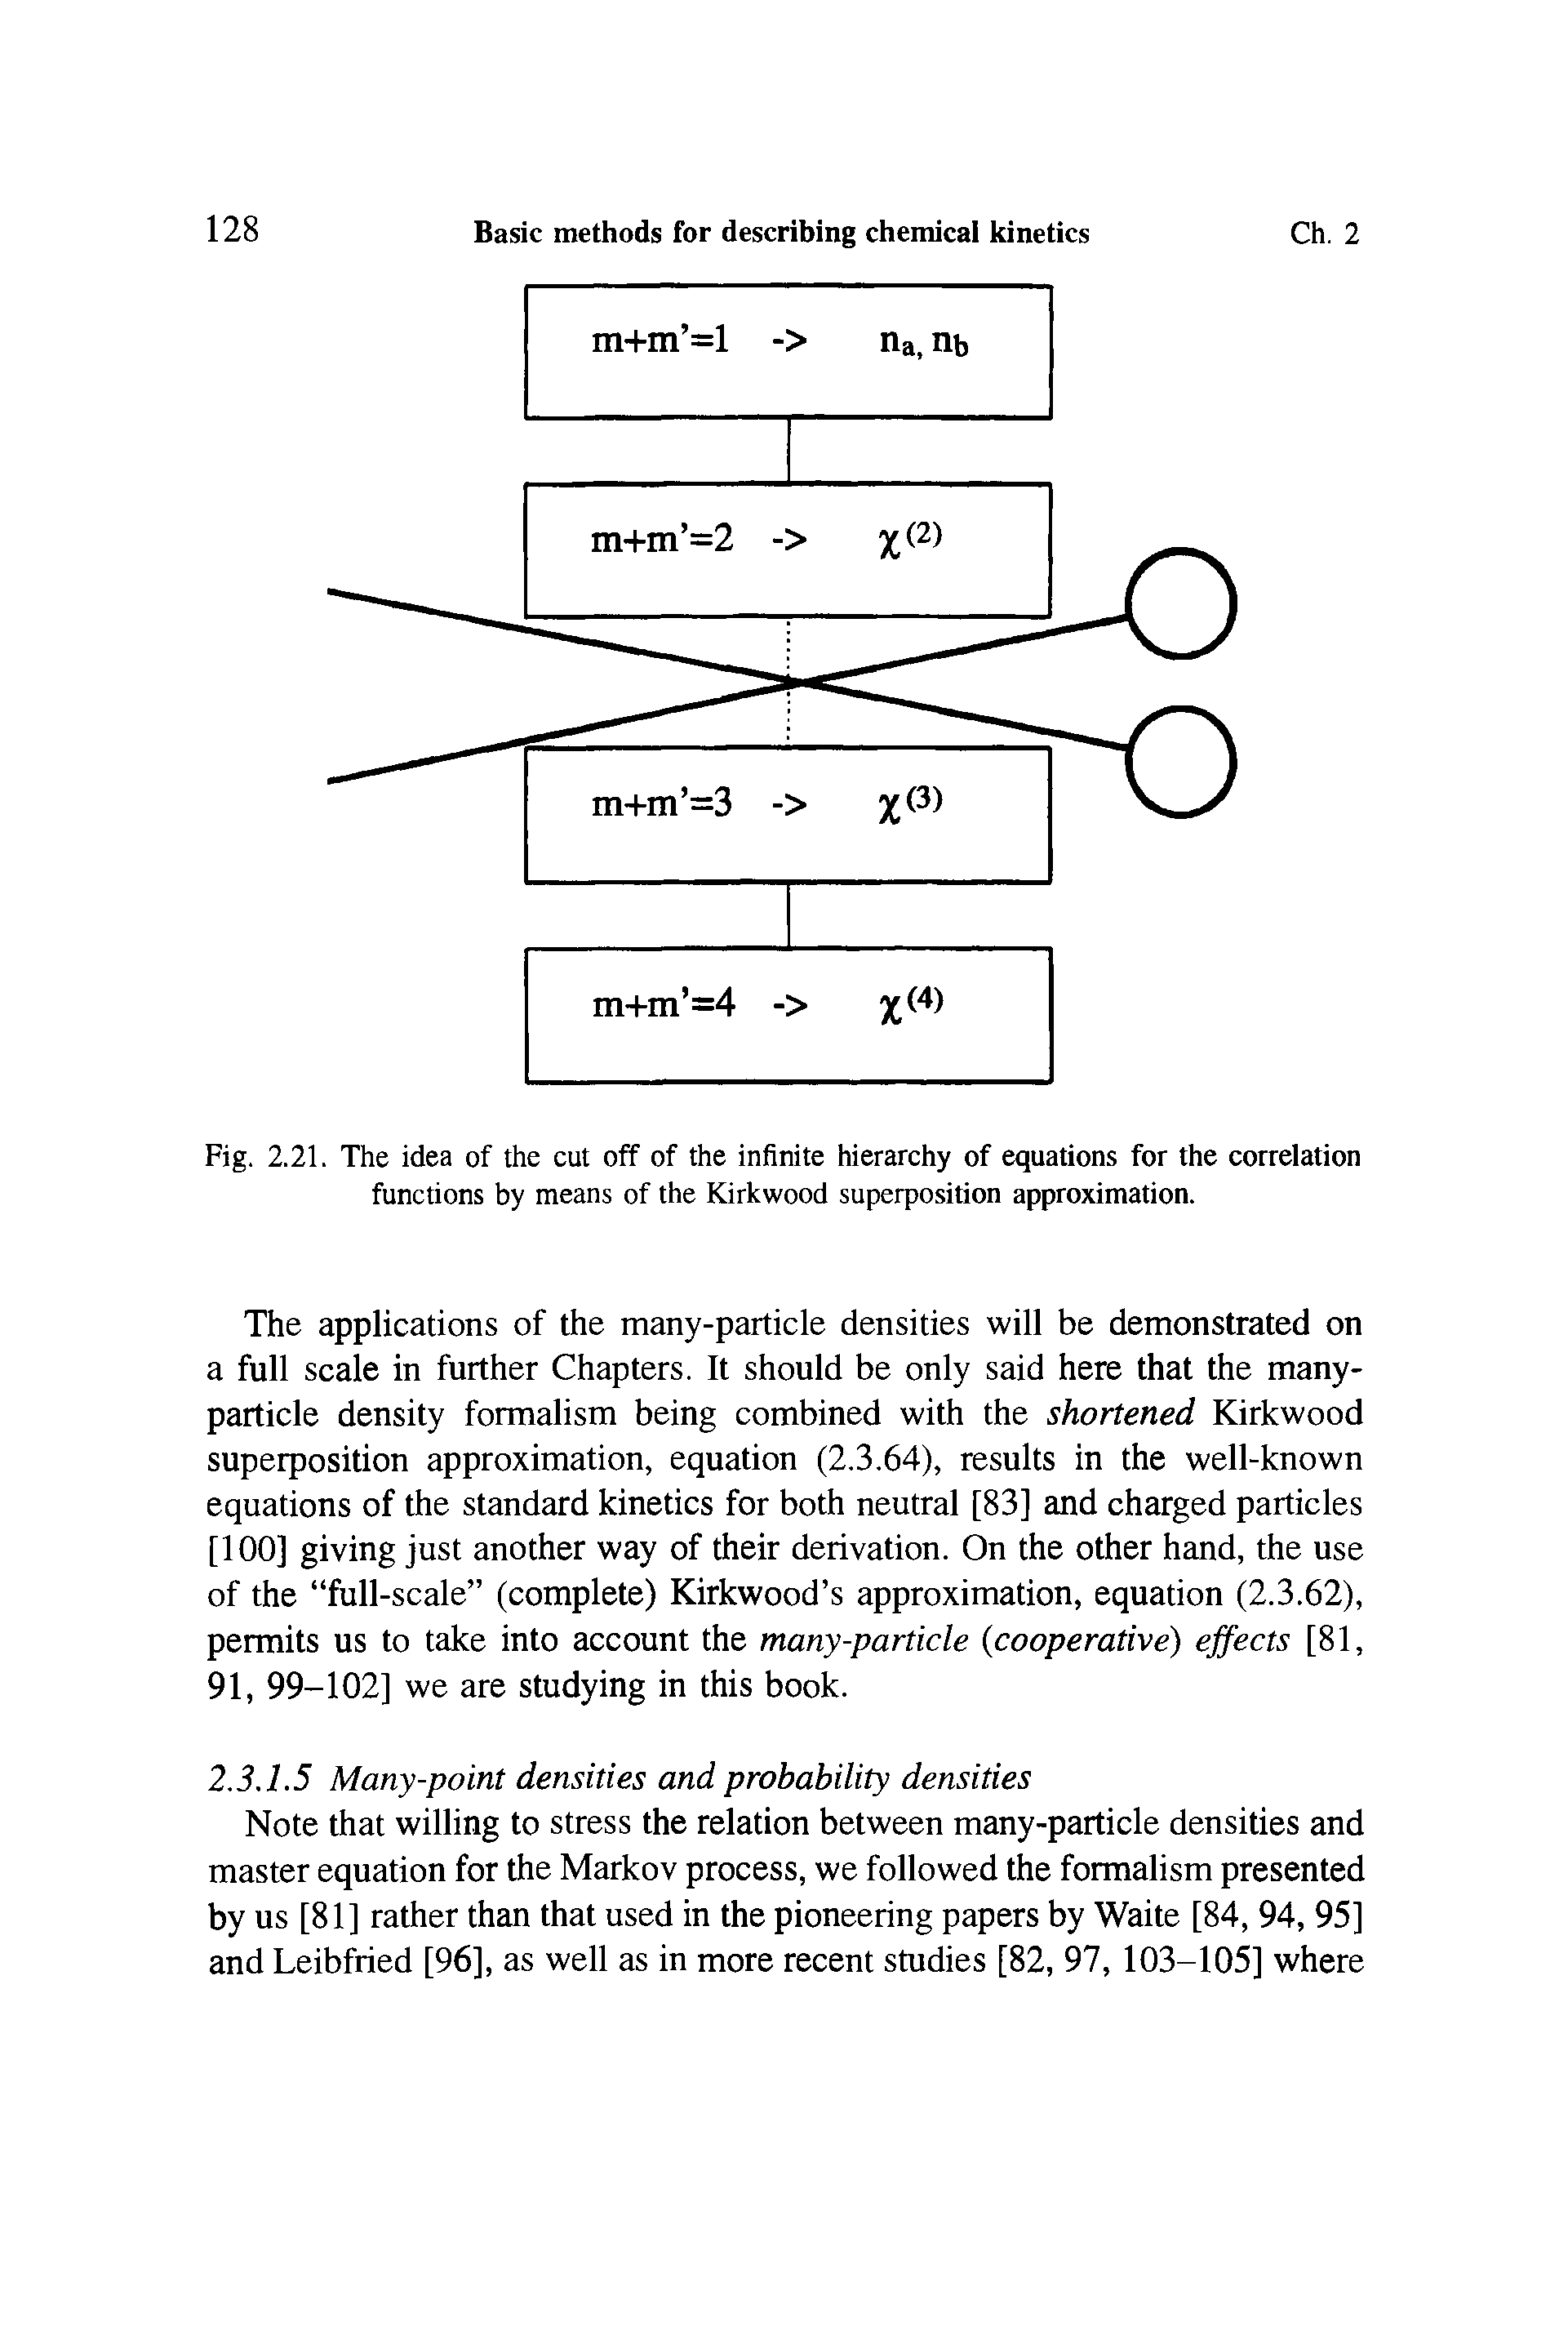 Fig. 2.21. The idea of the cut off of the infinite hierarchy of equations for the correlation functions by means of the Kirkwood superposition approximation.